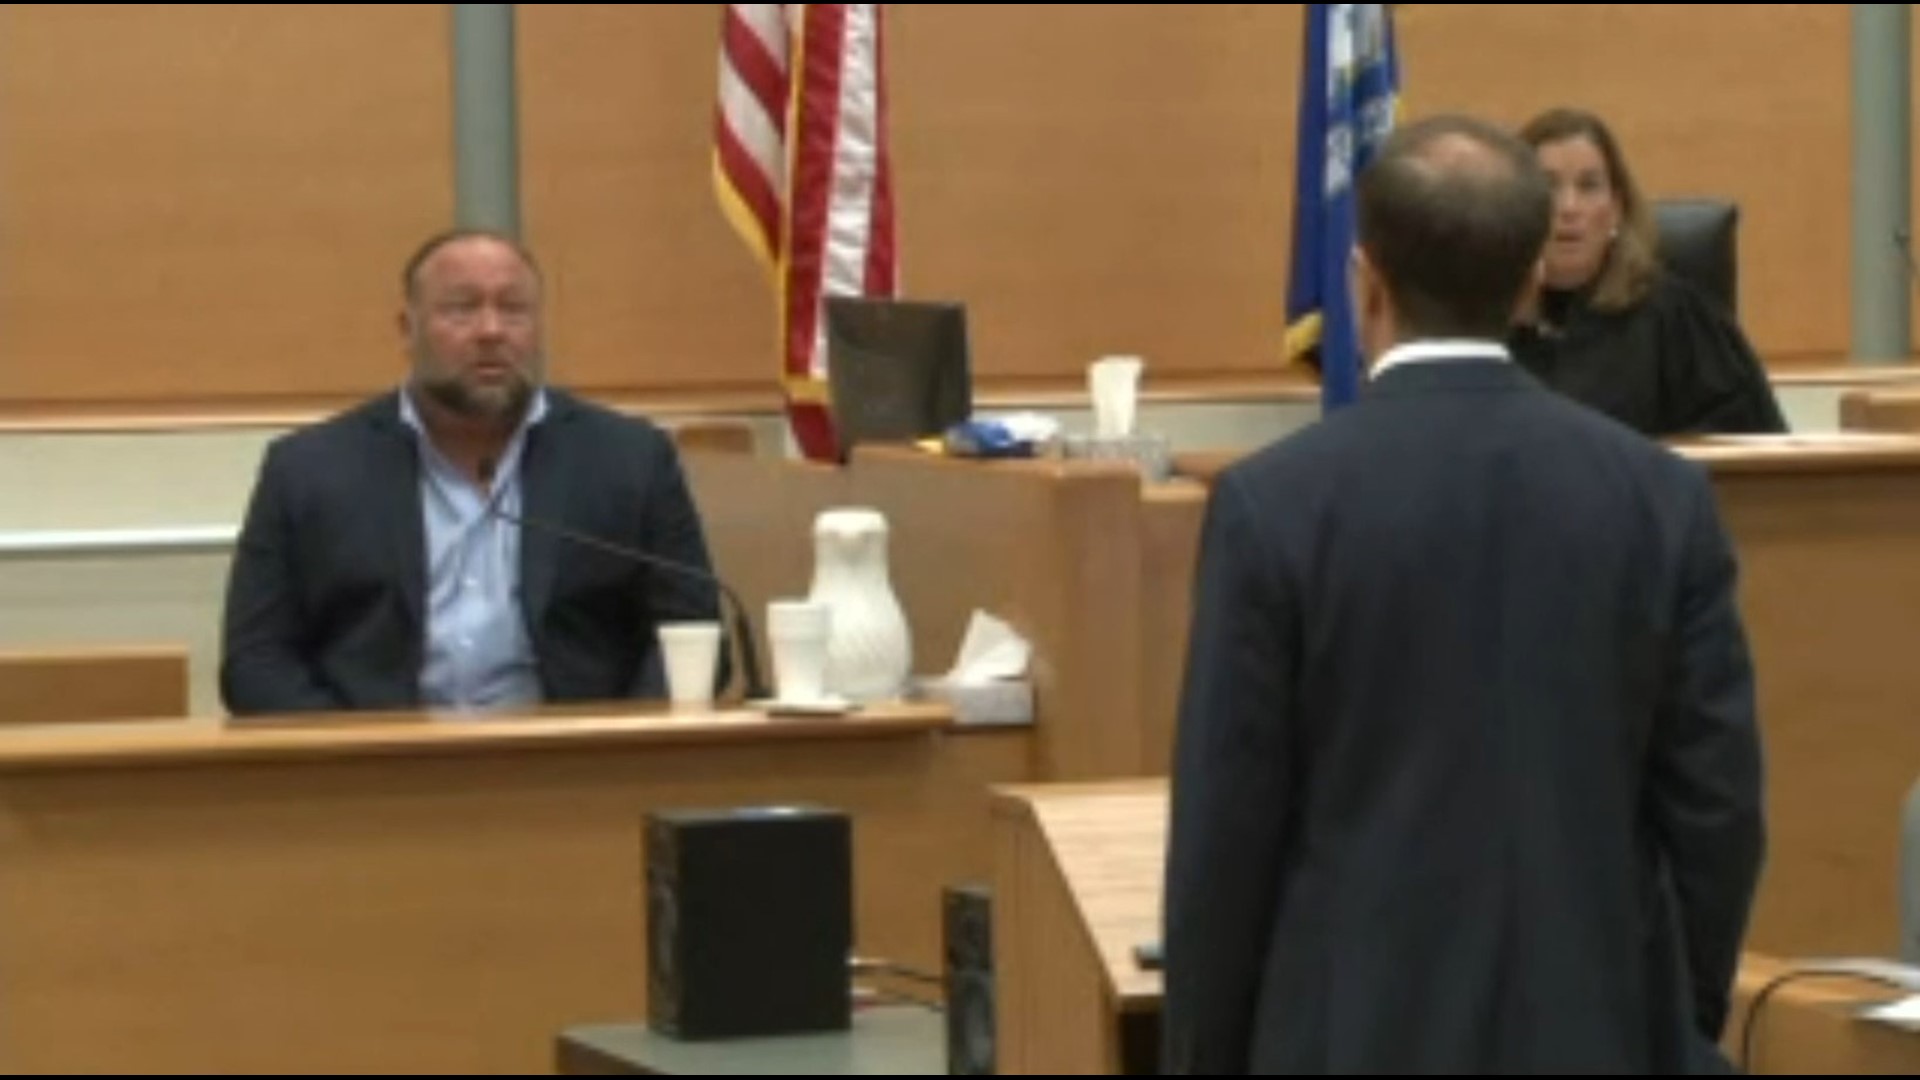 "And for years, you put a target on his back!" said Atty. Chris Mattei to Alex Jones on the stand